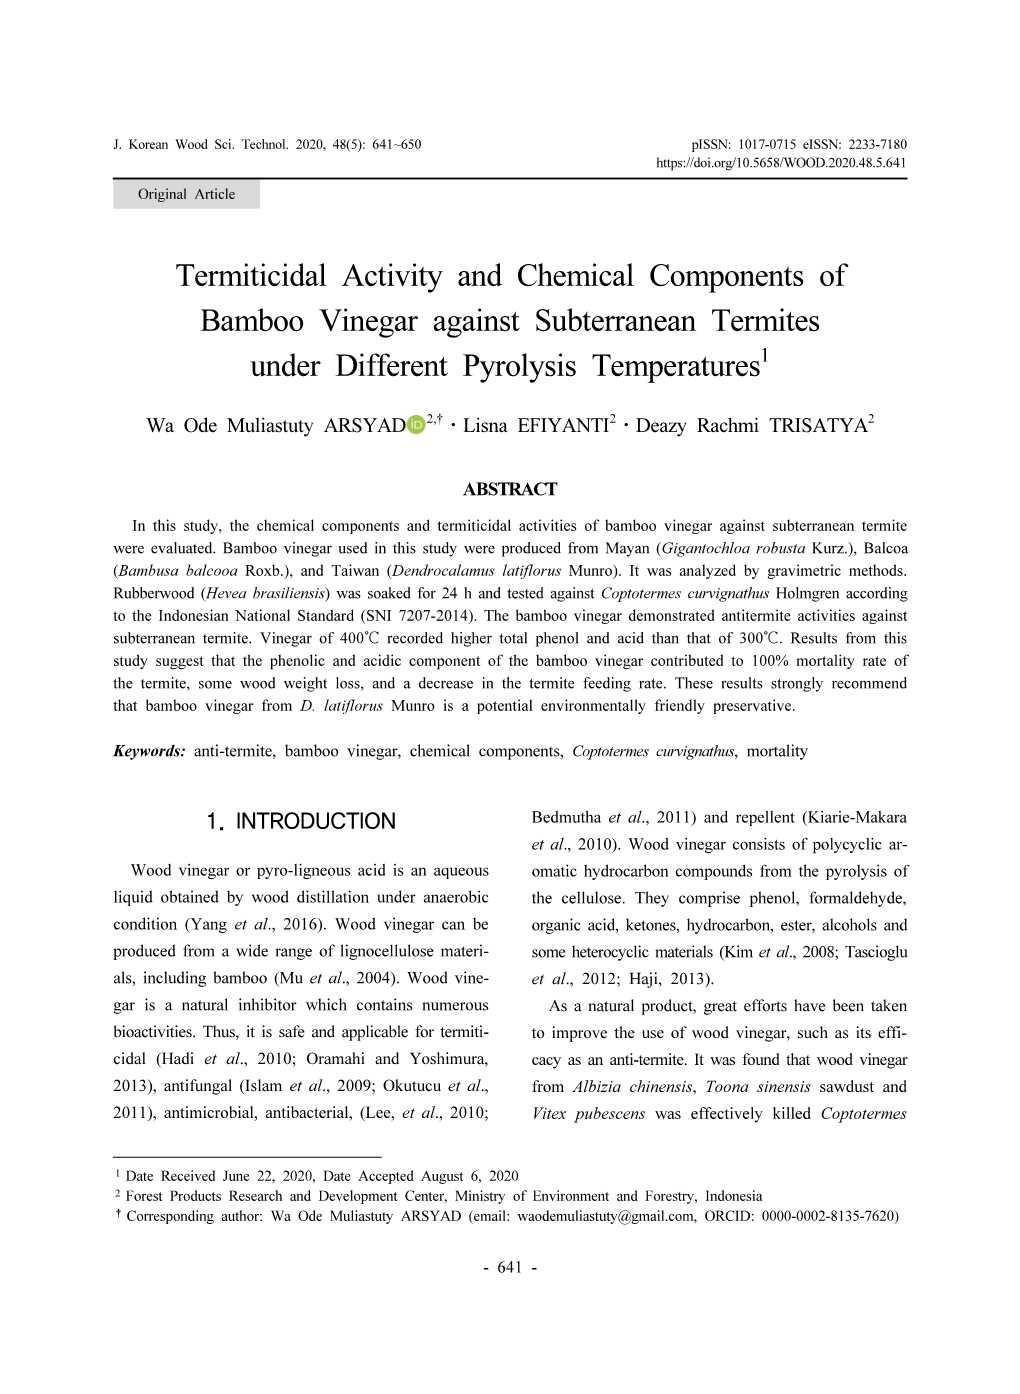 Termiticidal Activity and Chemical Components of Bamboo Vinegar Against Subterranean Termites Under Different Pyrolysis Temperatures1